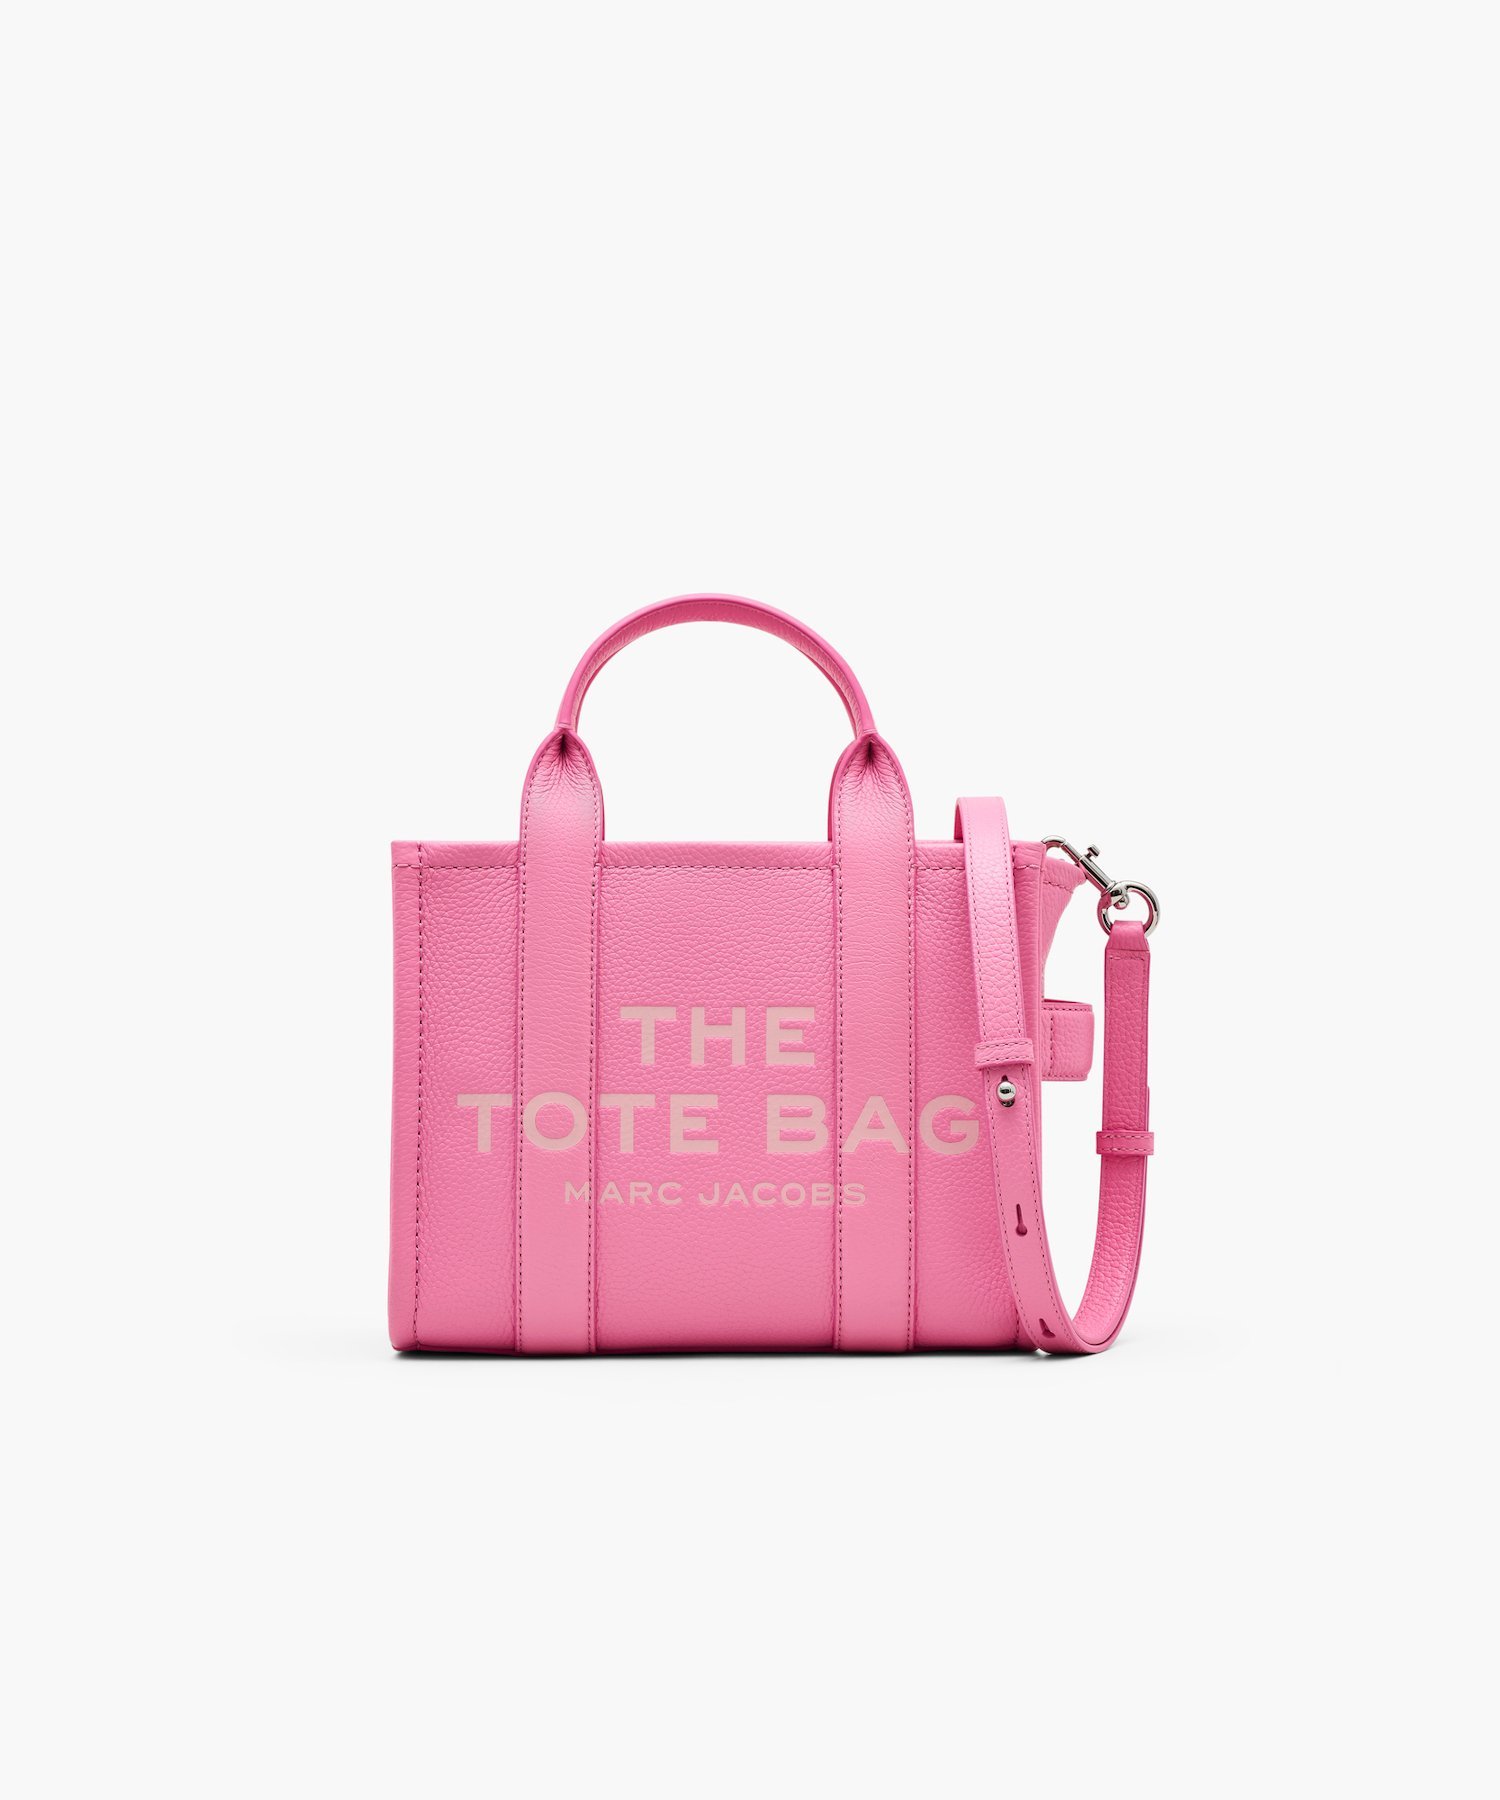 MARC JACOBS 【公式】THE LEATHER SMALL TOTE BAG/ザ レザー スモール トートバッグ マーク ジェイコブス バッグ トートバッグ【送料無料】